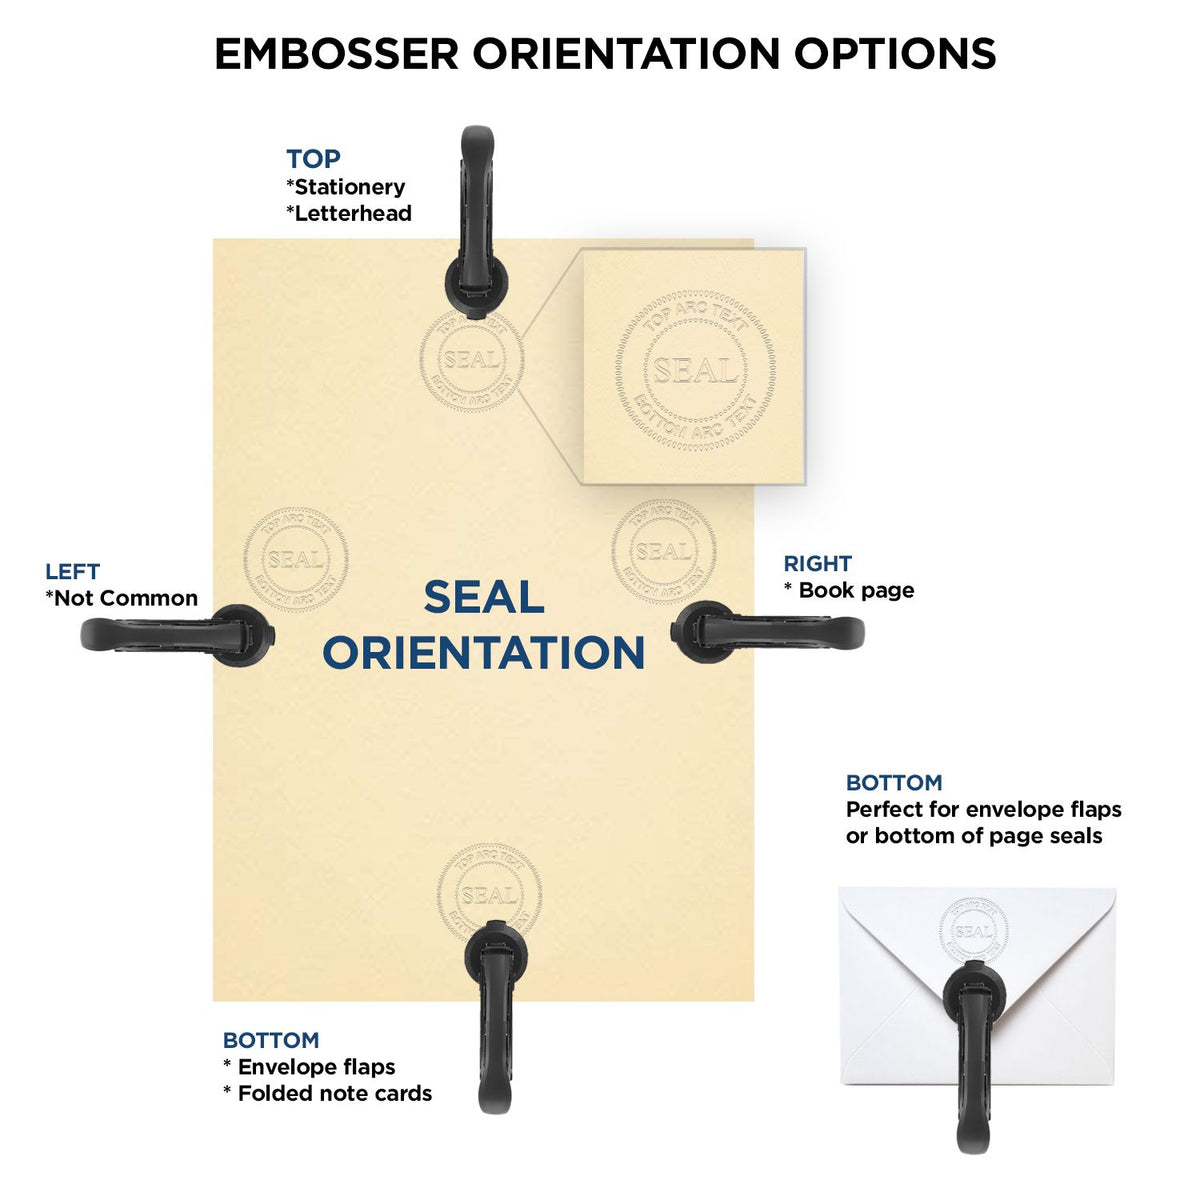 An infographic for the Heavy Duty Cast Iron Indiana Engineer Seal Embosser showing embosser orientation, this is showing examples of a top, bottom, right and left insert.